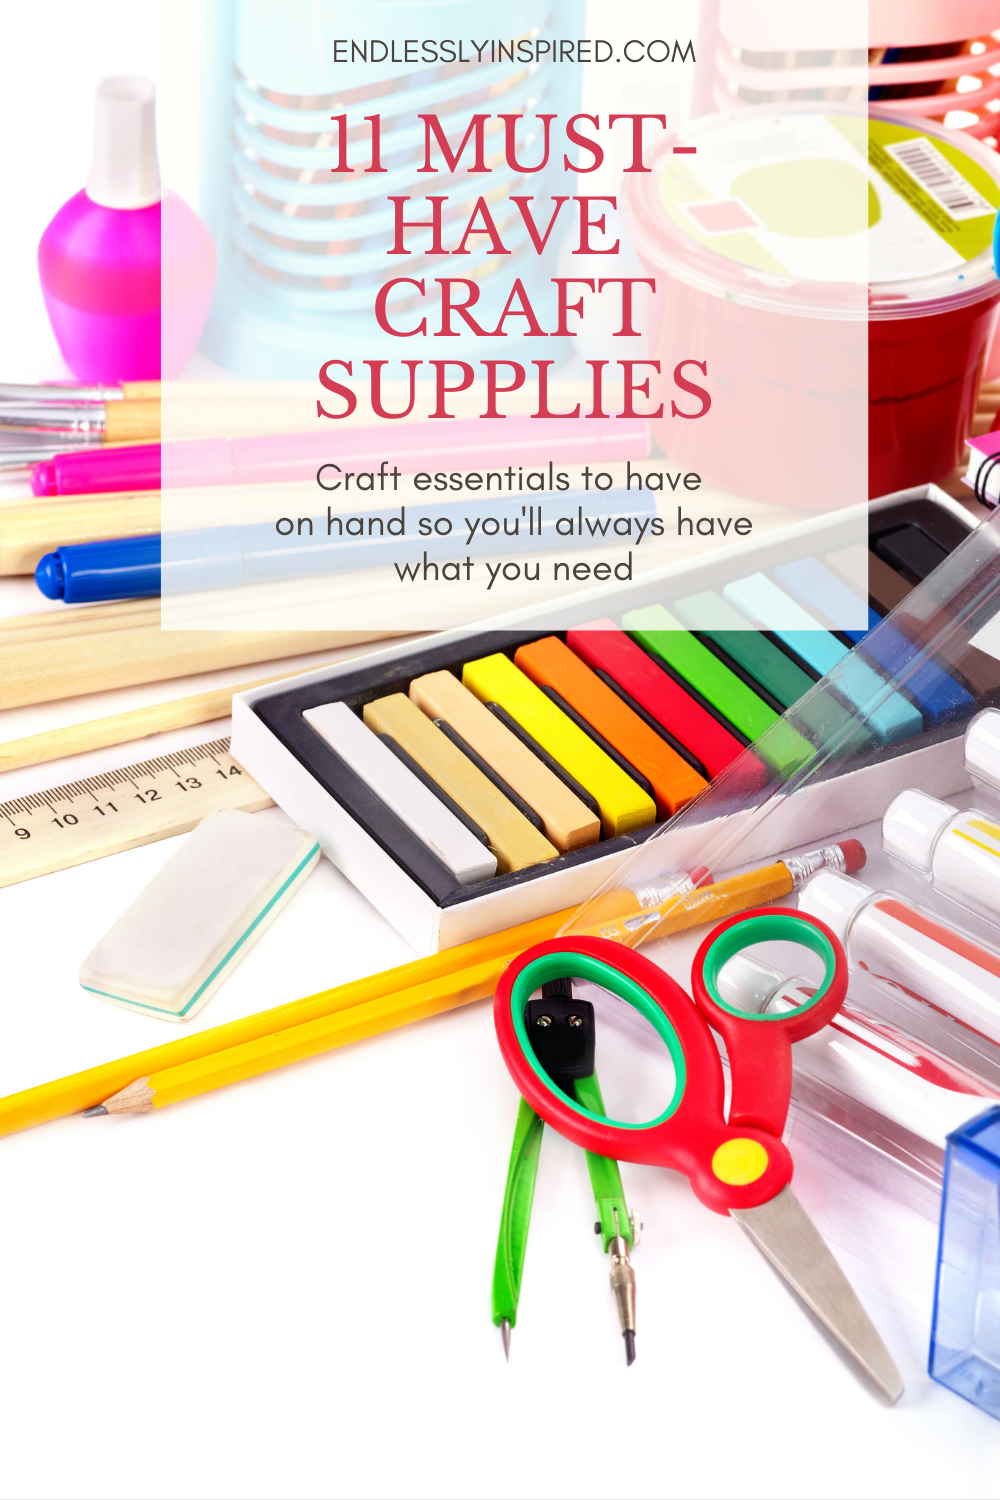 Our List of Essential Craft Supplies - Super Simple